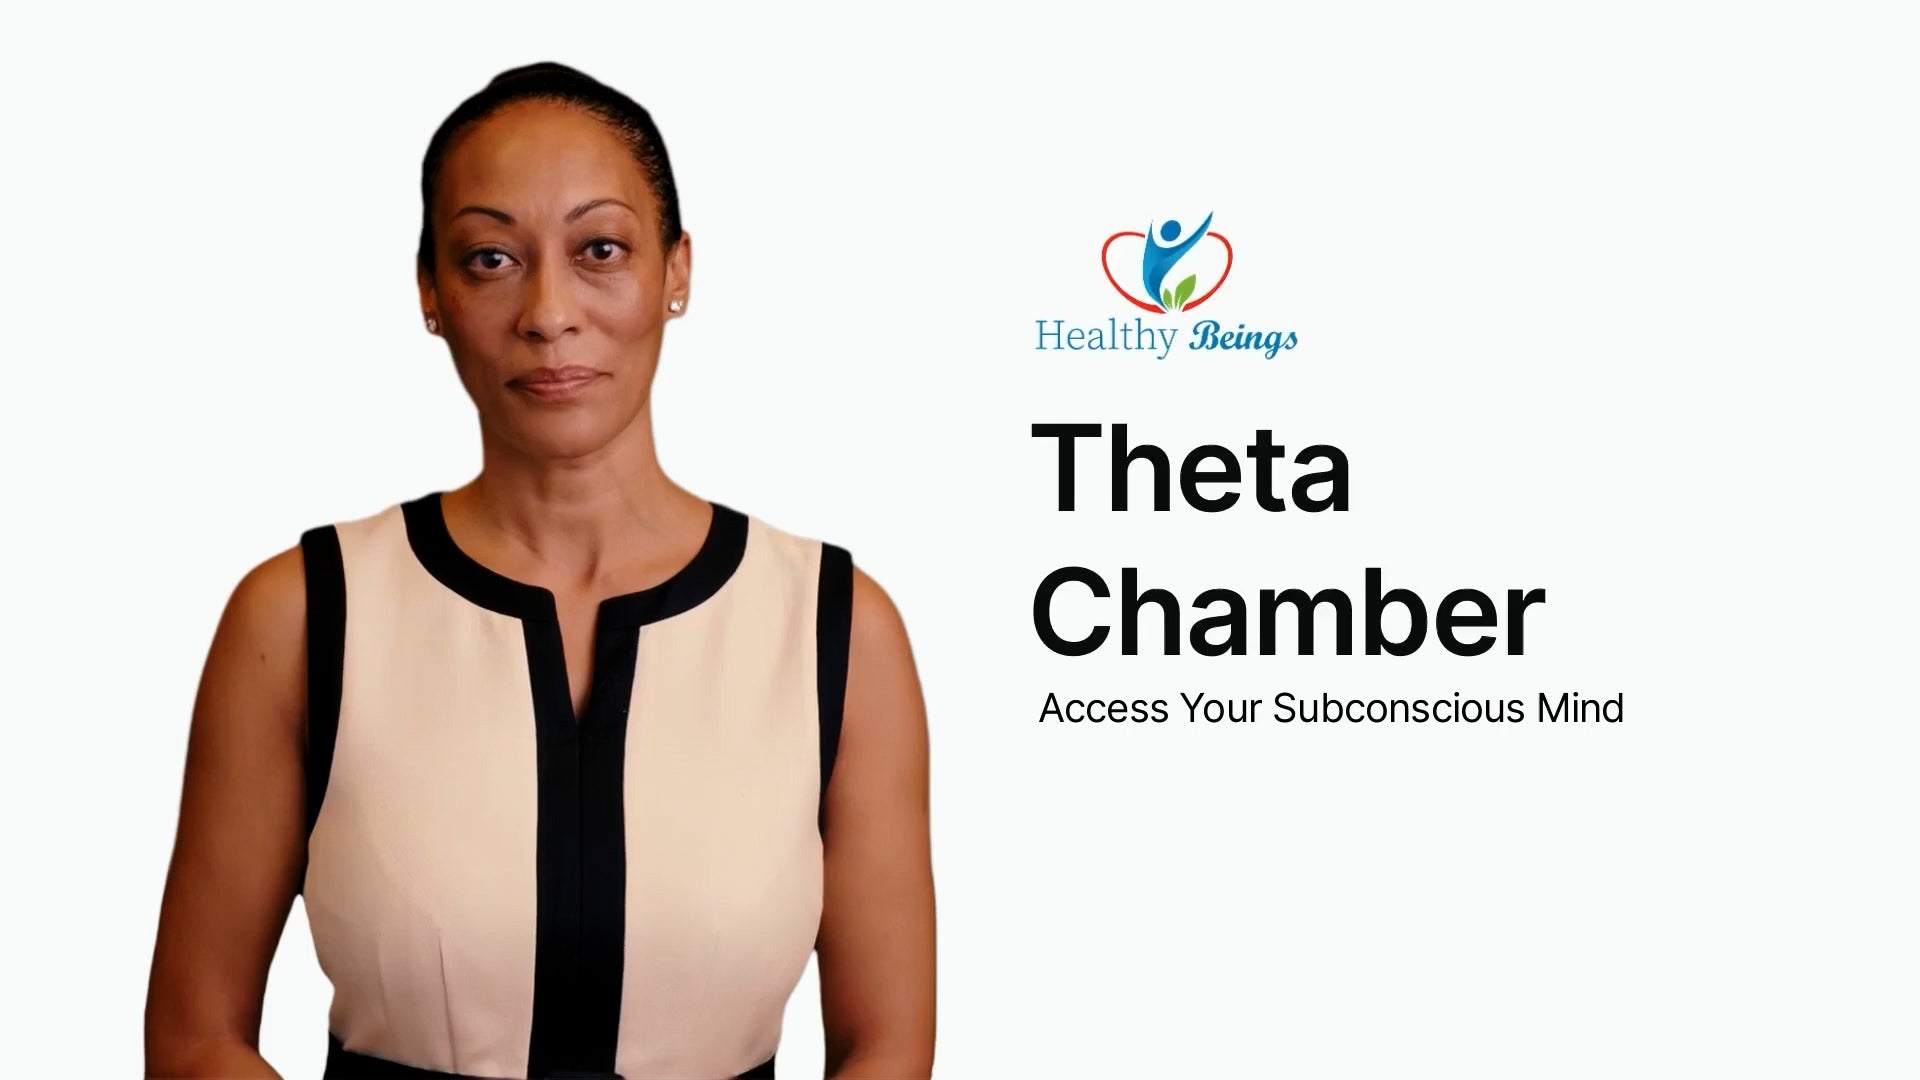 Load video: Theta Chamber to Access Your Subconscious